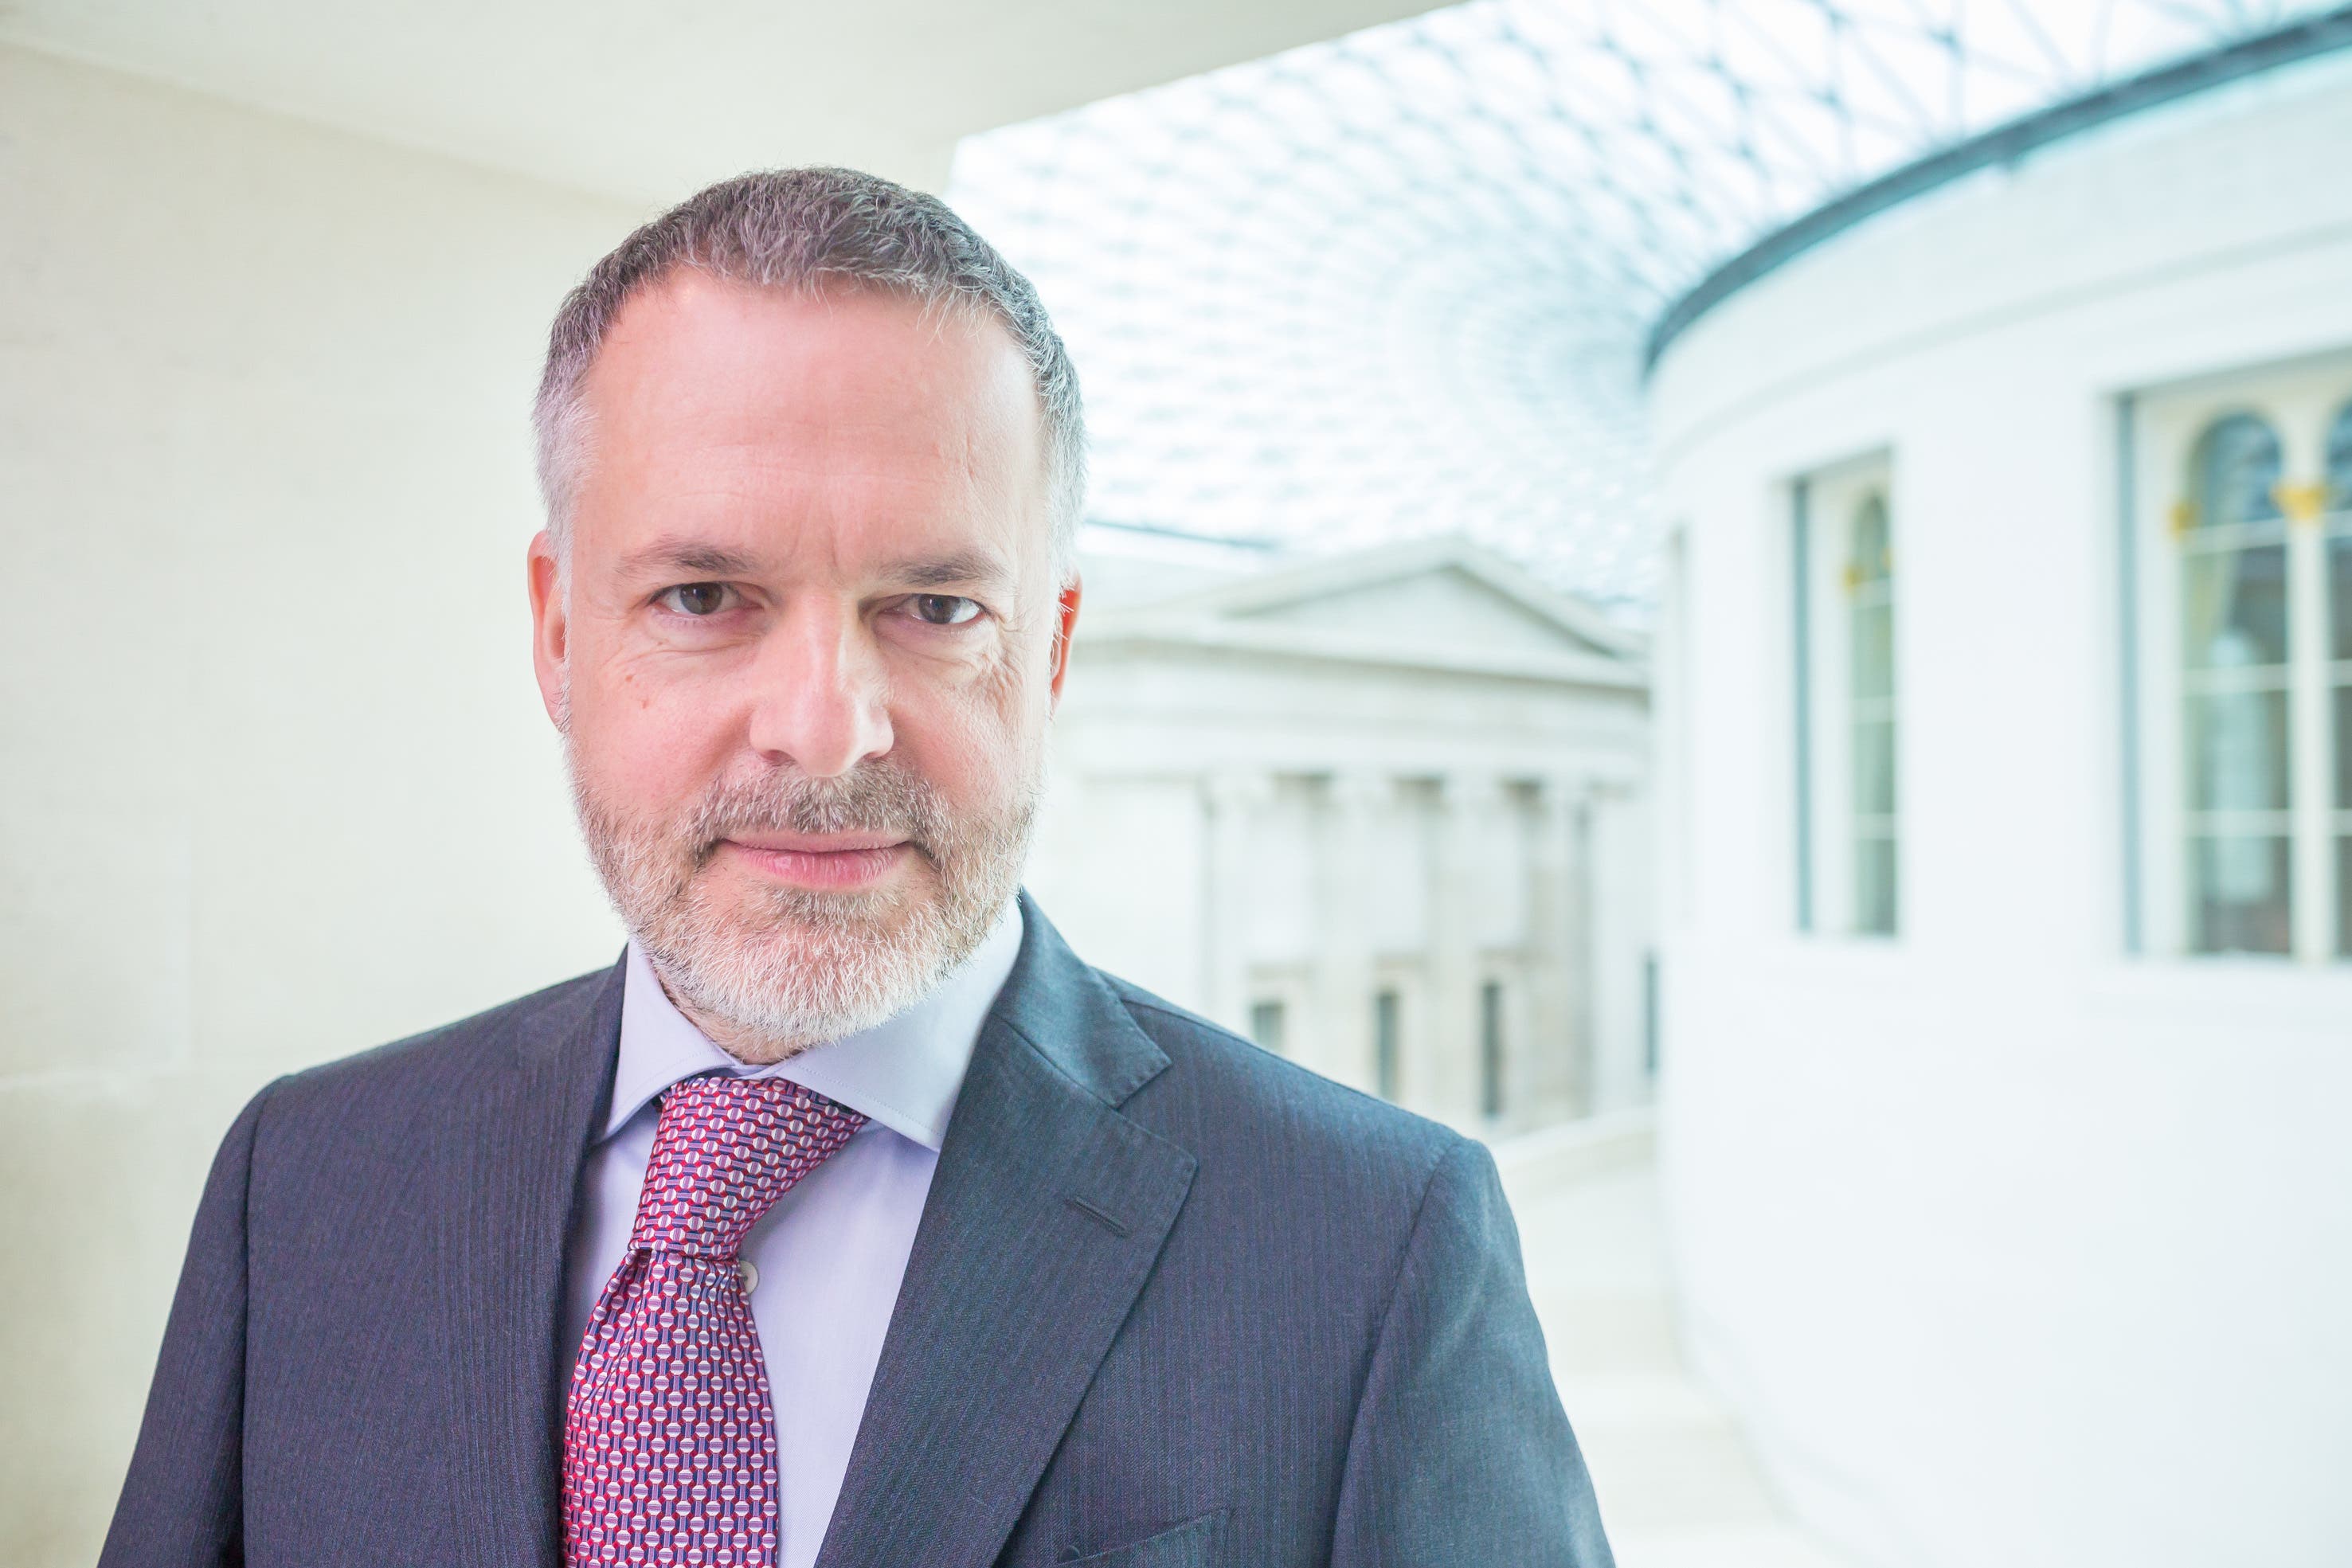 Hartwig Fischer is stepping down as director of the British Museum over the scandal